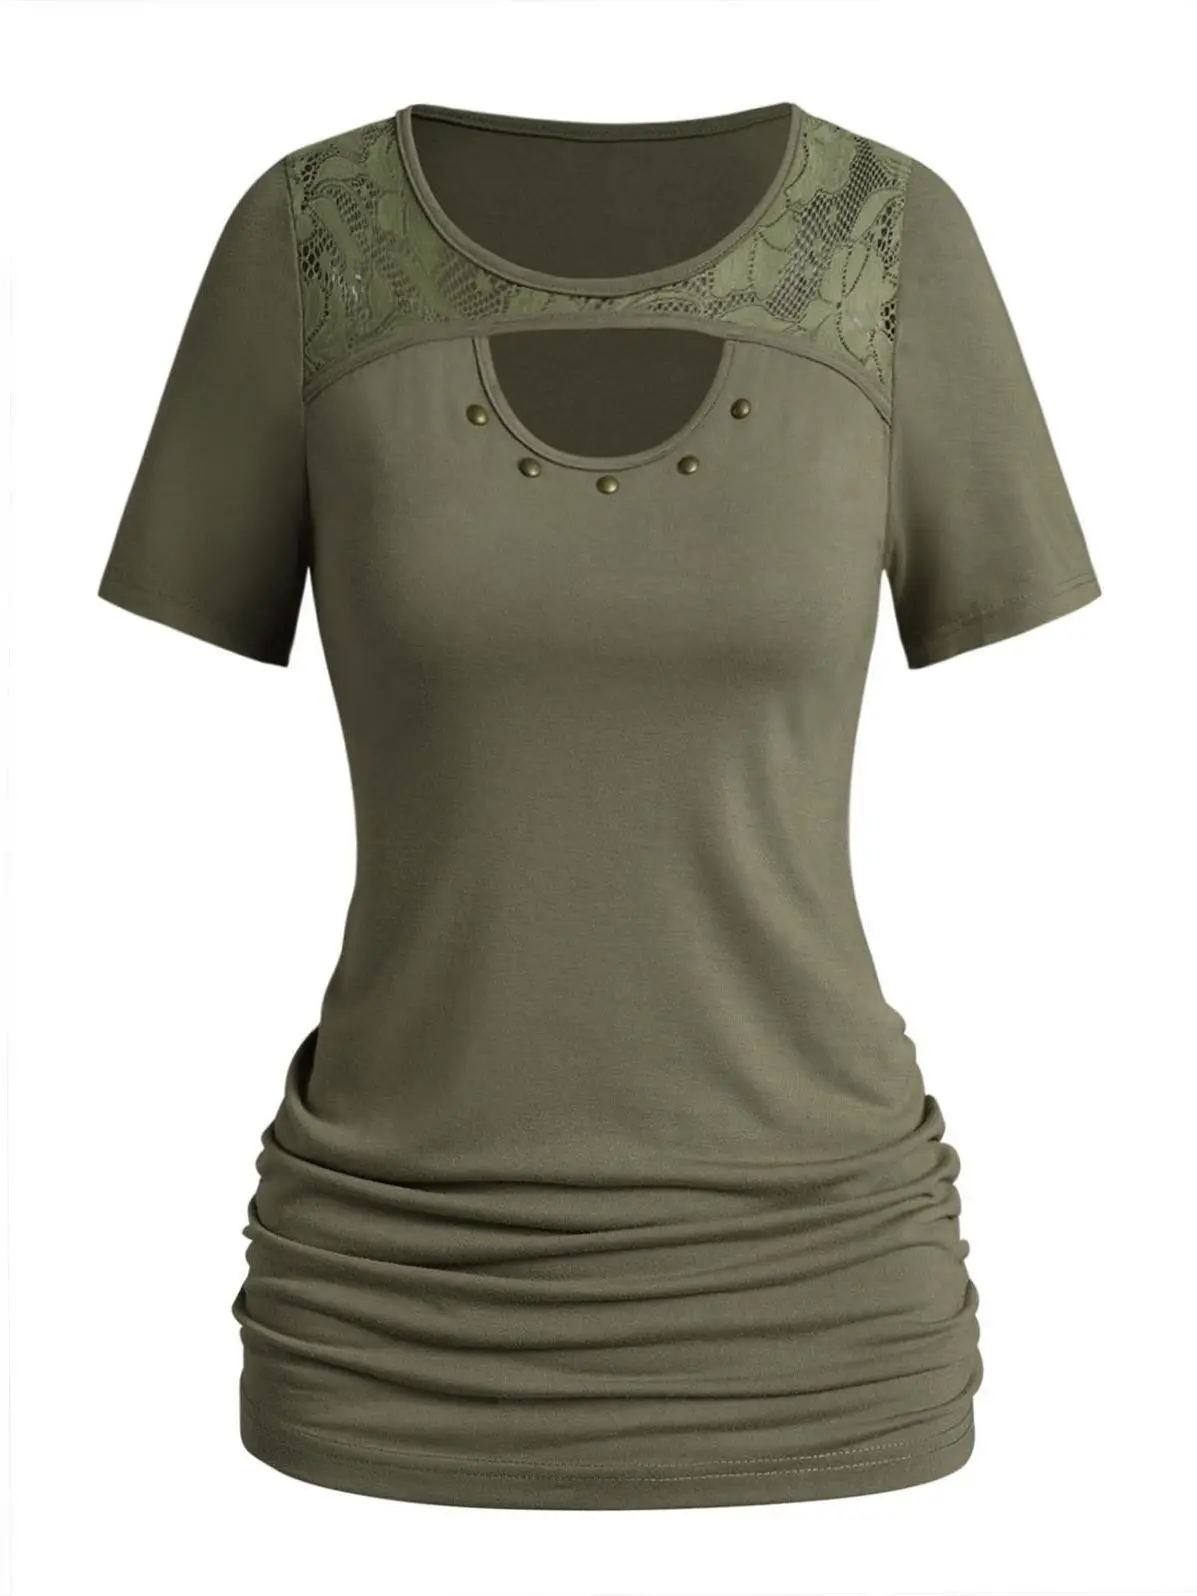 

Dressfo Armygreen Casual T Shirt Hollow Out Lace Short Sleeves Women Tops Panel Rivet Peekaboo Cut Ruched Tee